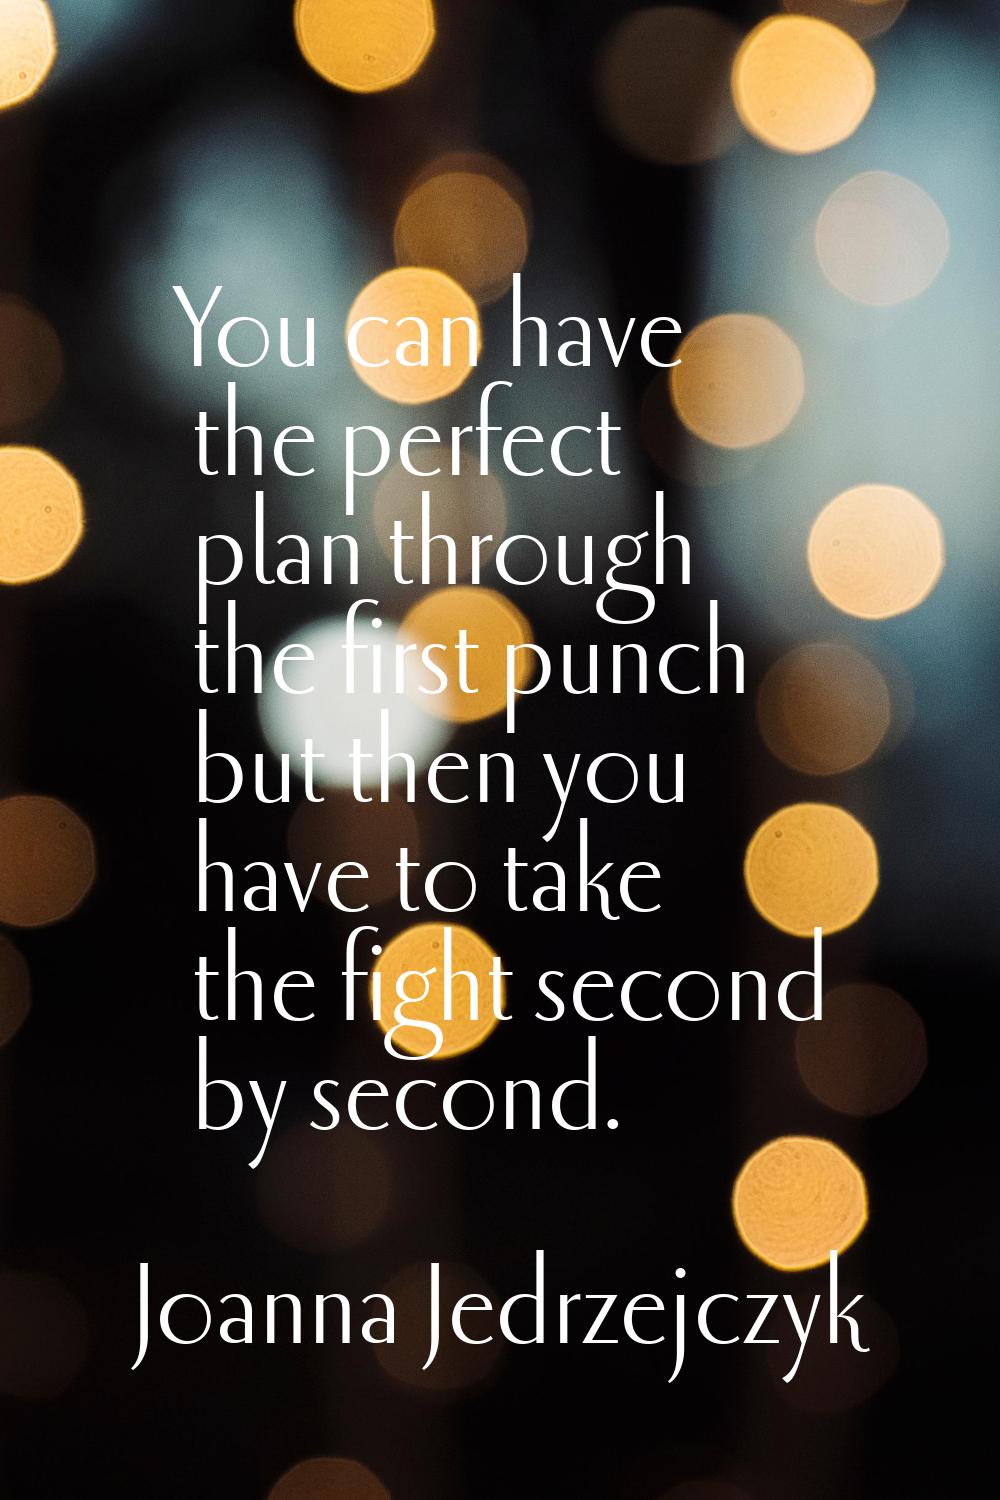 You can have the perfect plan through the first punch but then you have to take the fight second by